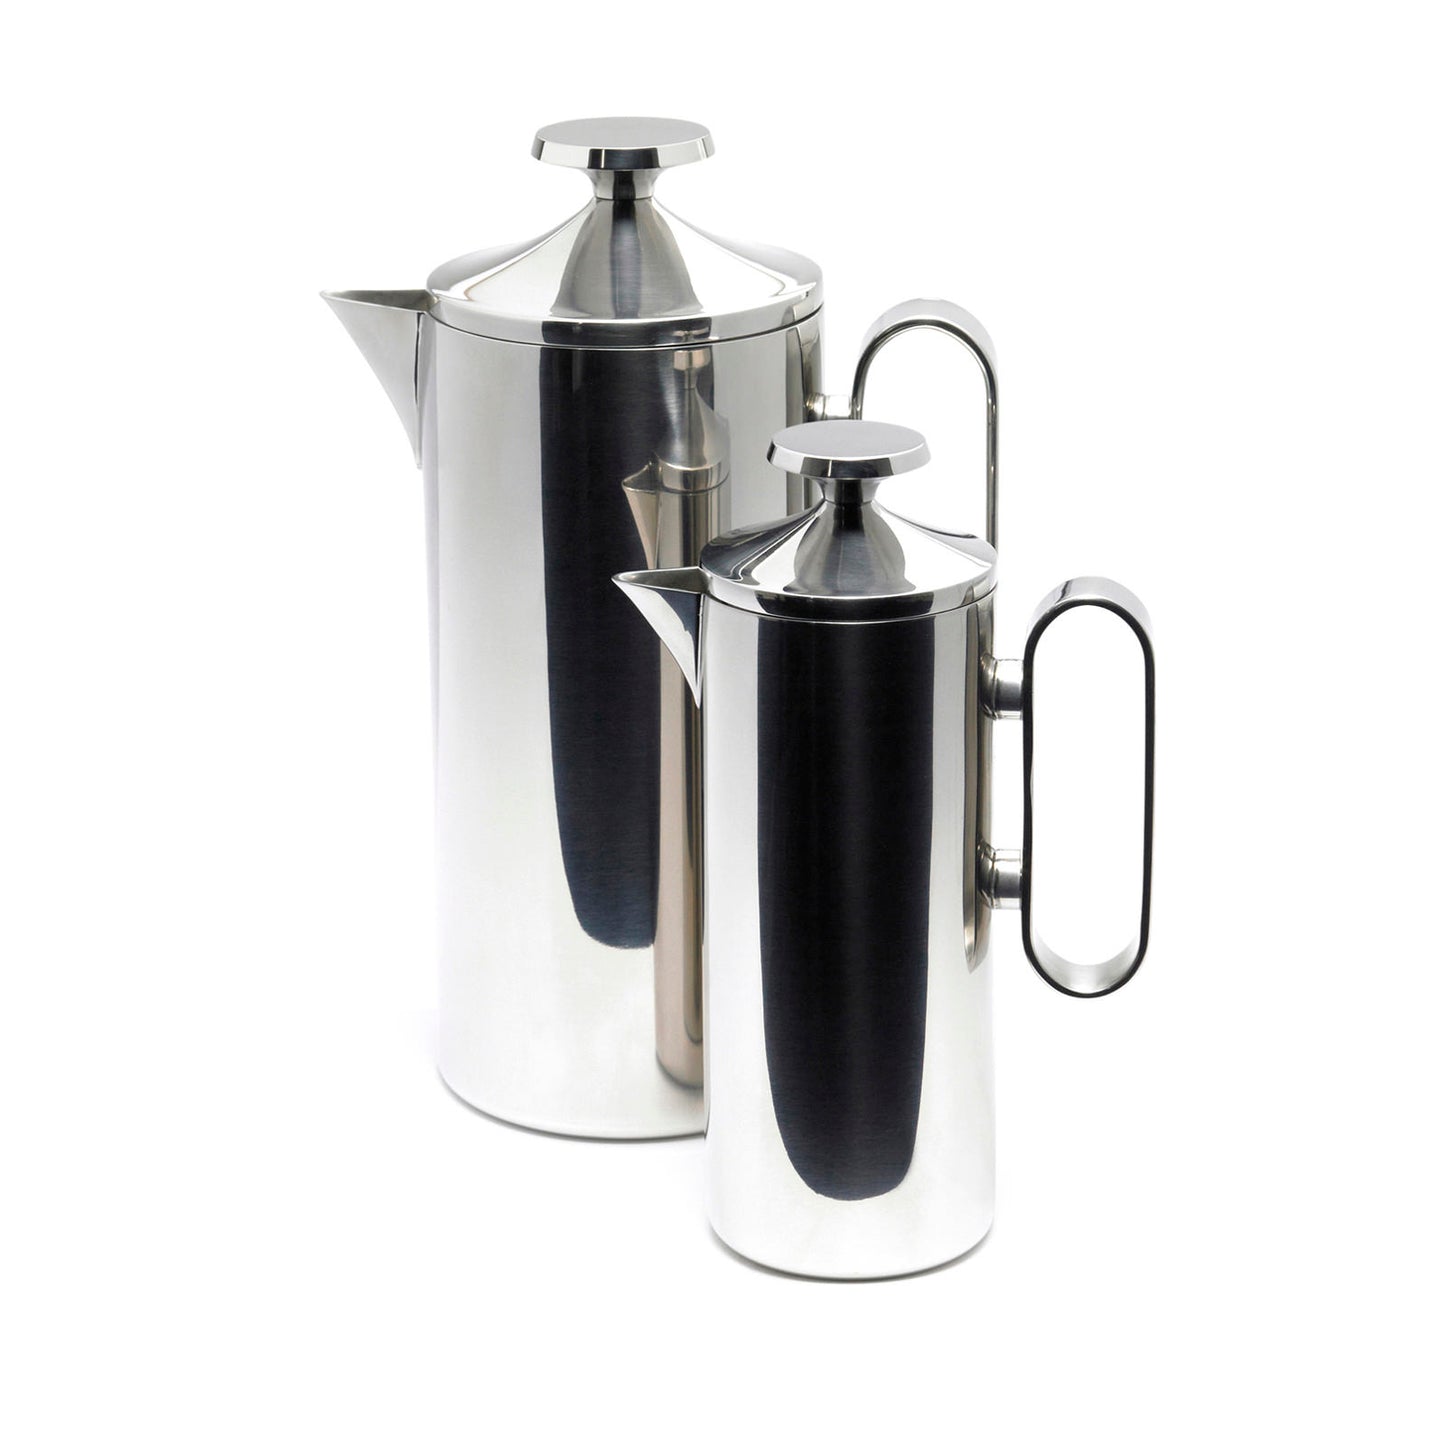 David Mellor Stainless Steel Cafetière